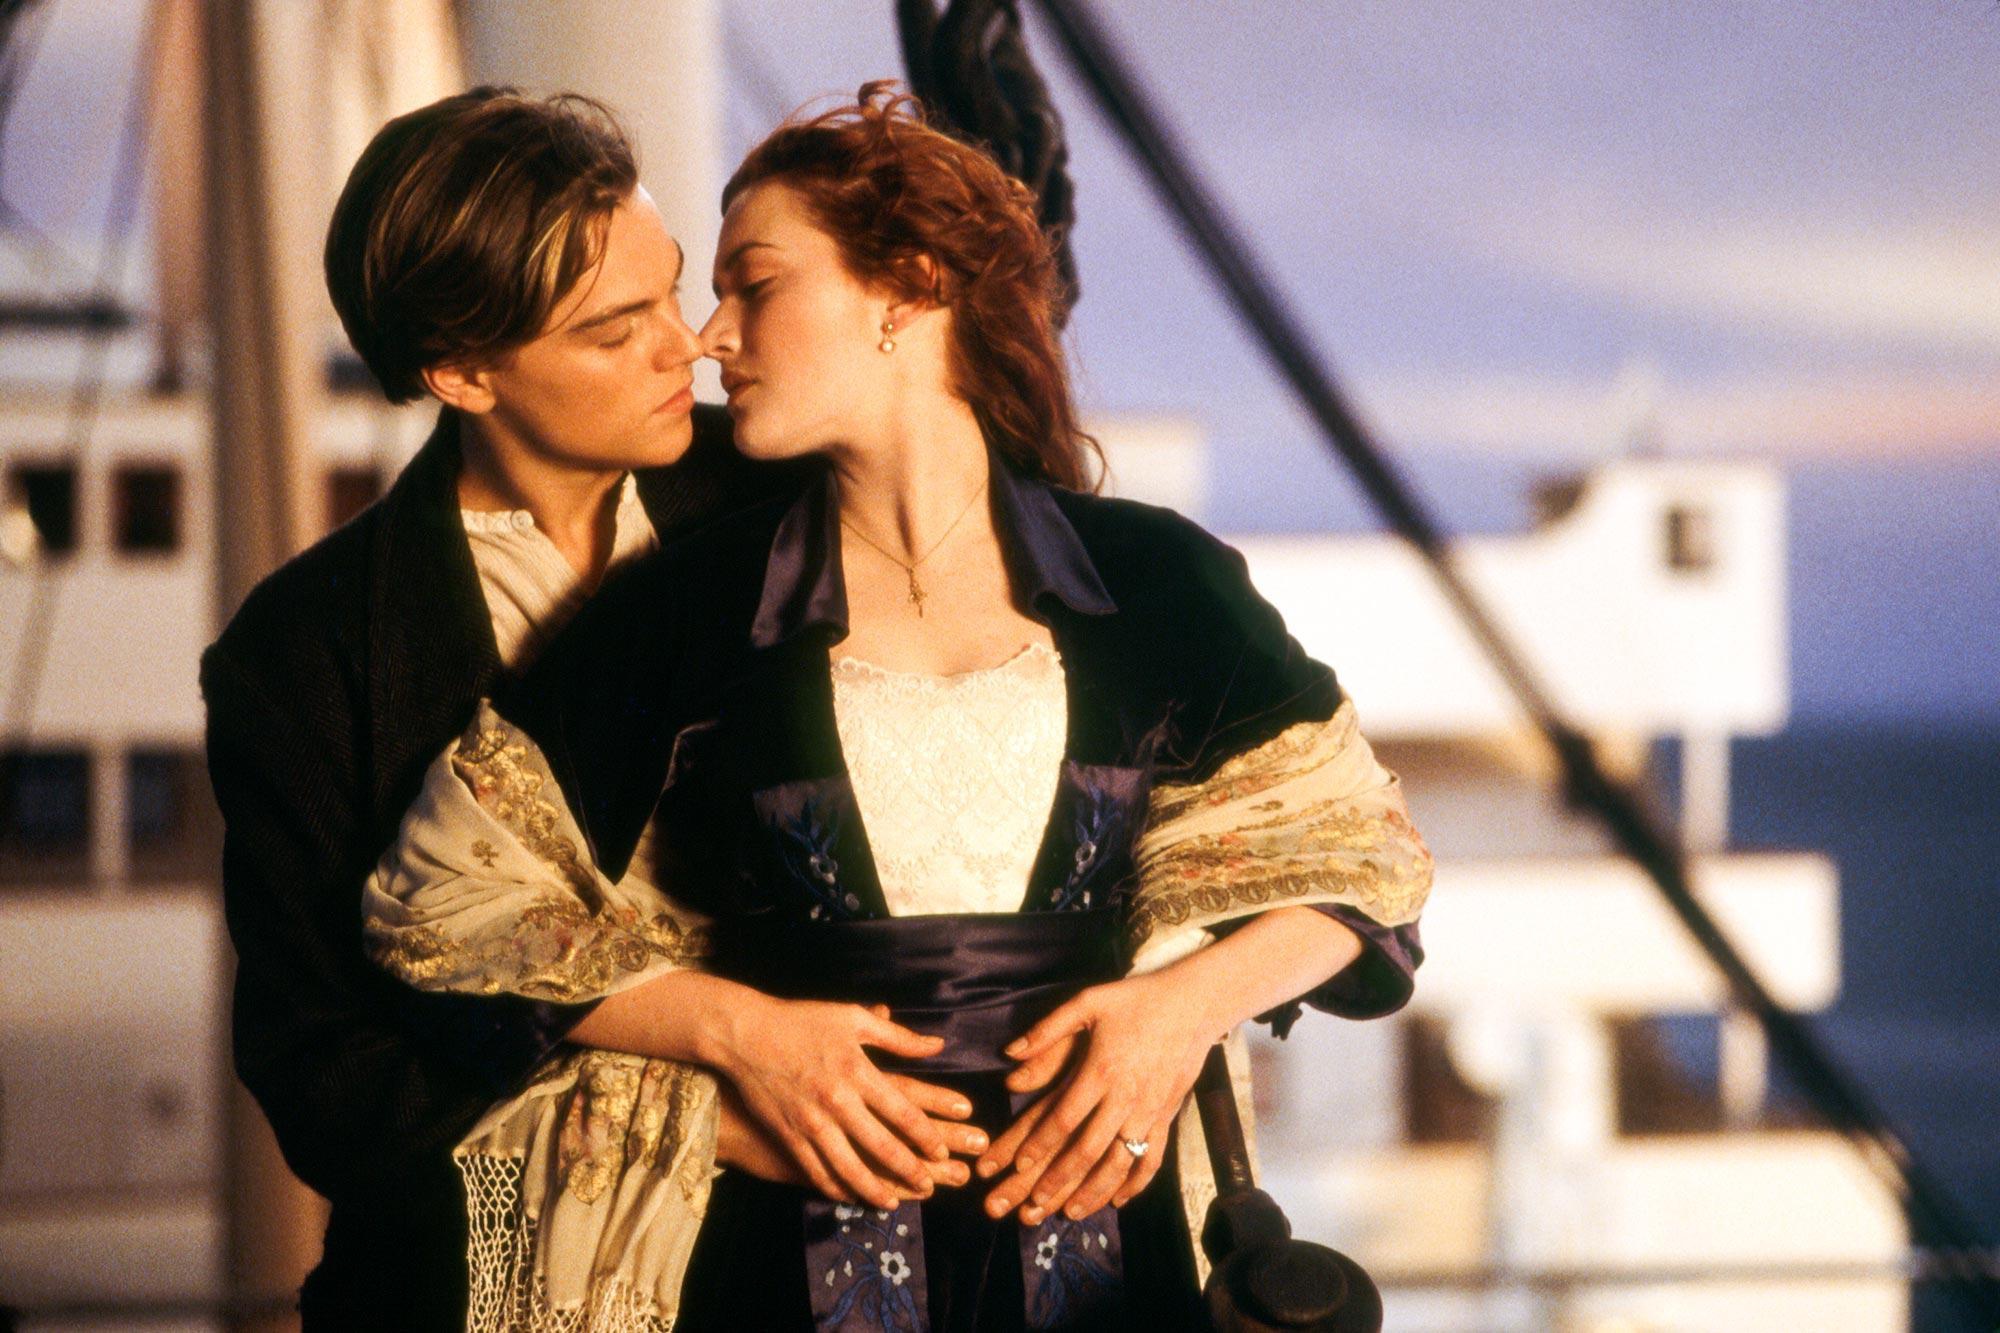 Actor Leonardo DiCaprio at the age of U50: "Wild horse" forever chasing love with long legs, special relationship with Rose "Titanic" - Photo 14.